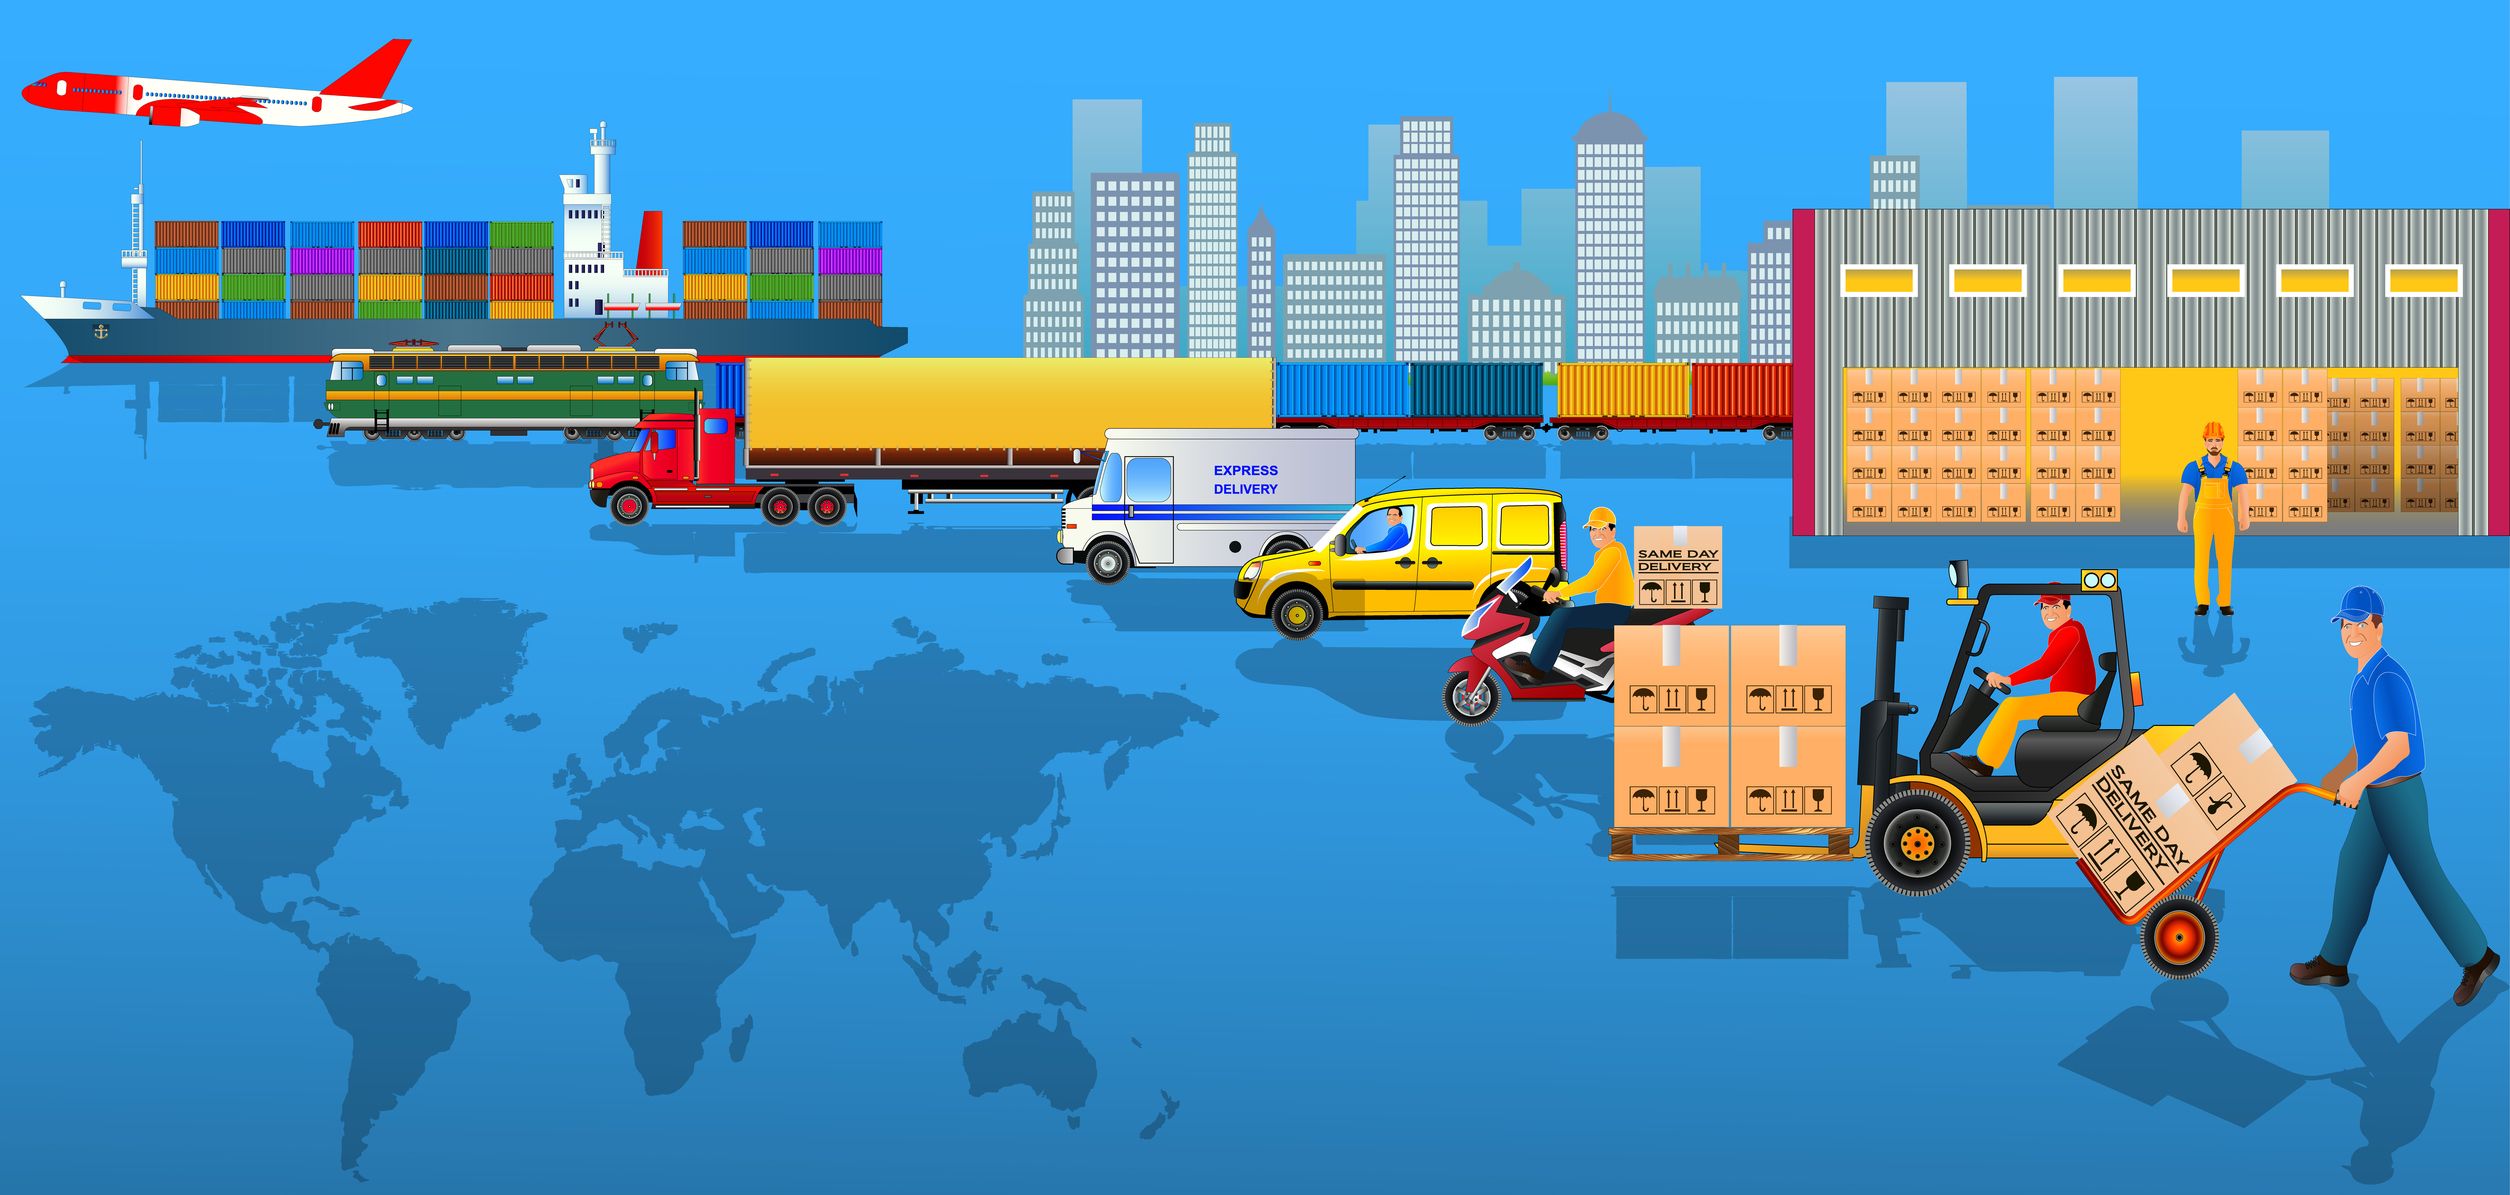 4 benefits of the supply chain operations management systems